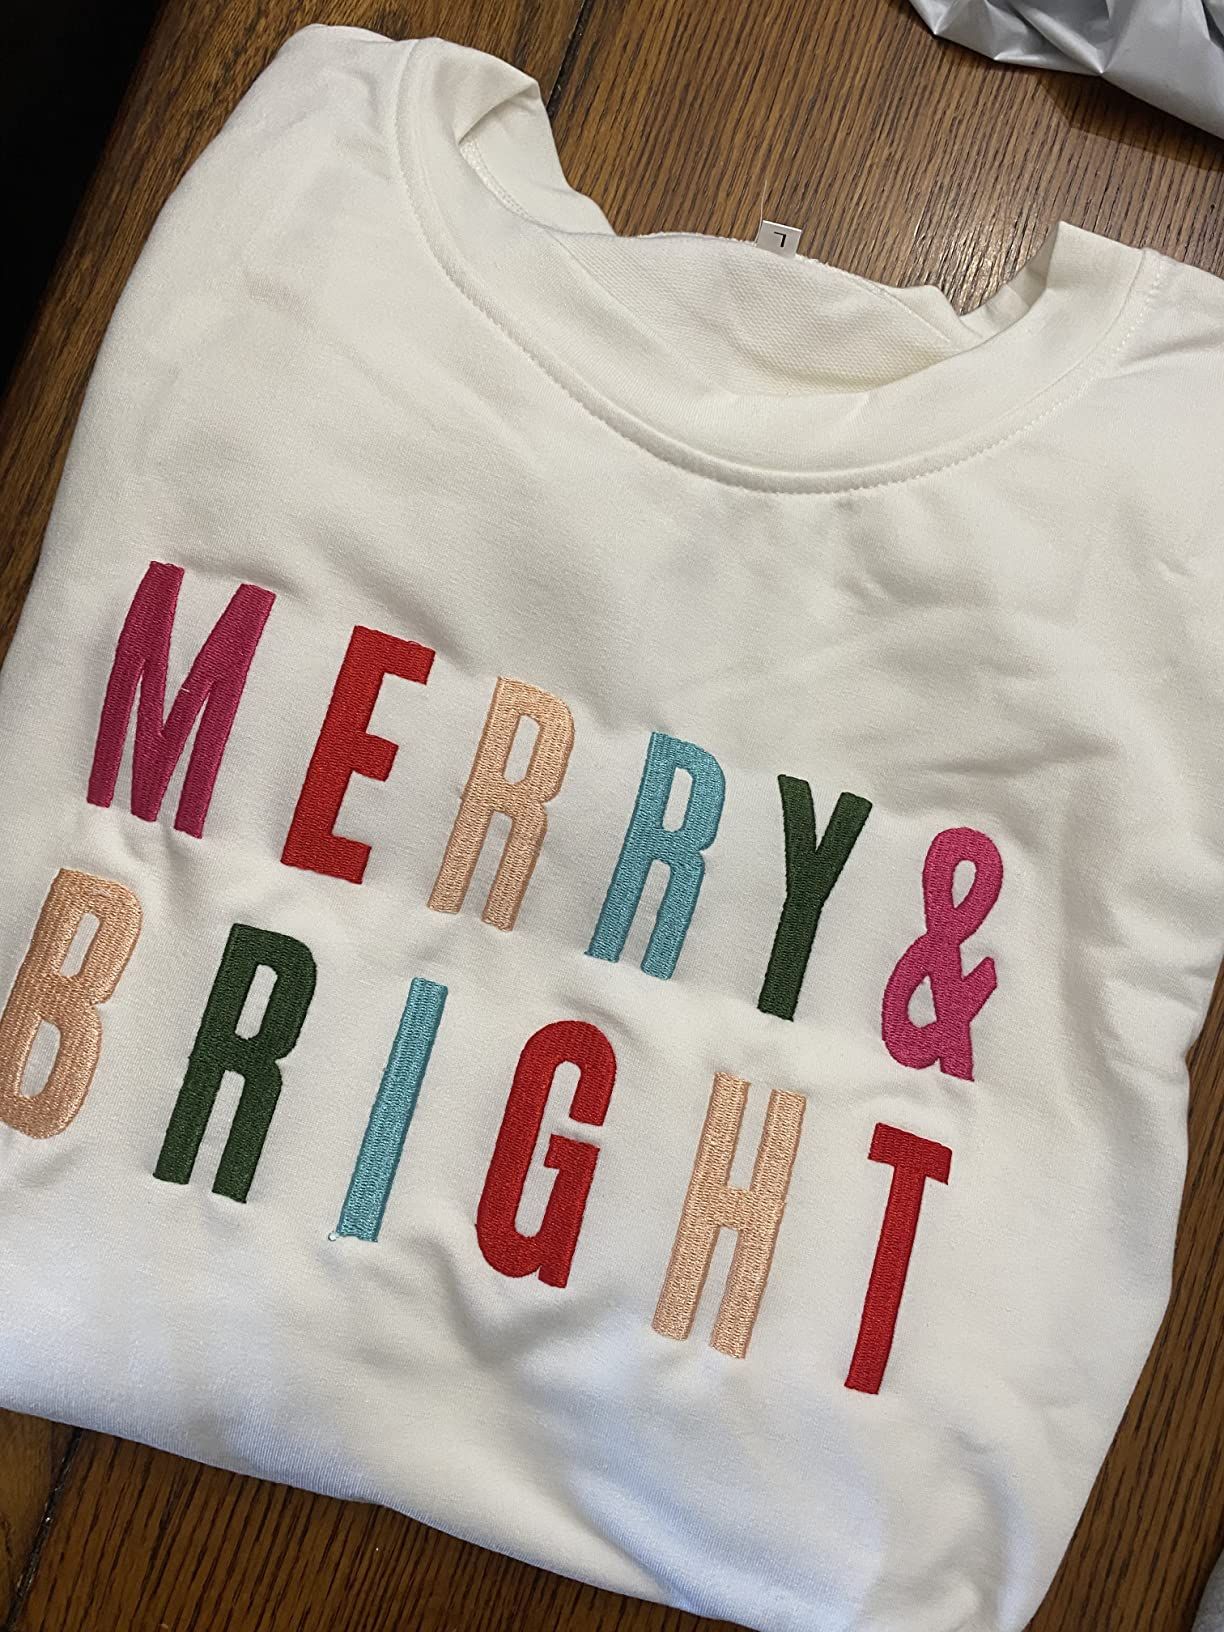 MOUSYA Christmas T-Shirt Women Merry Bright Colorful Letter Printed Sweatshirt Casual Long Sleeve Round Neck Pullover Tops | Amazon (US)